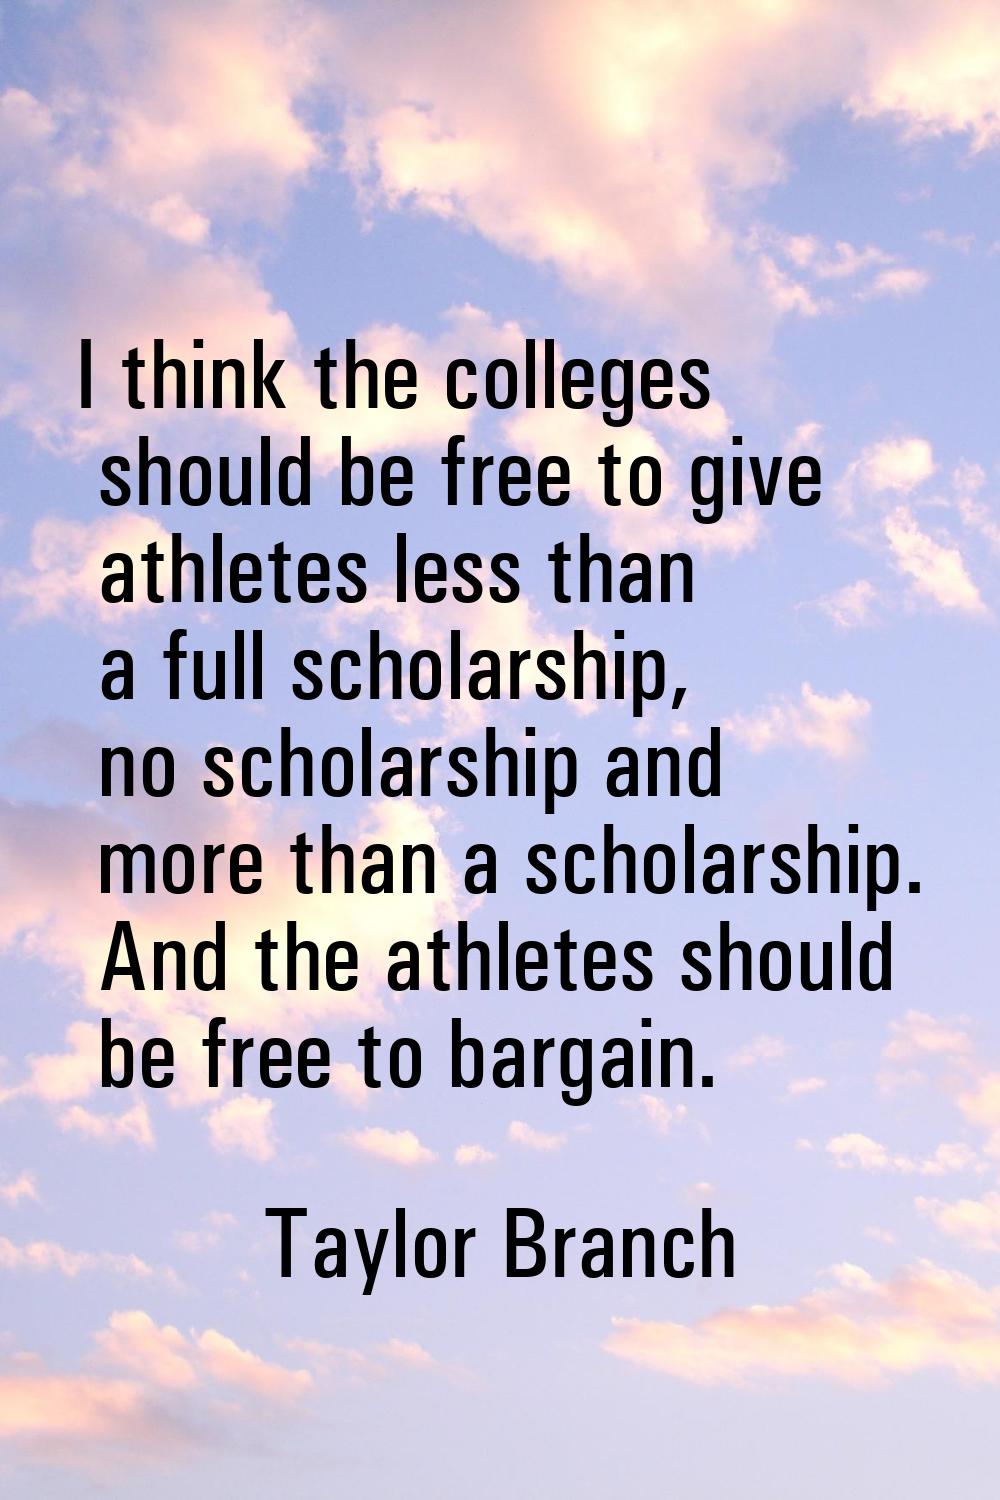 I think the colleges should be free to give athletes less than a full scholarship, no scholarship a